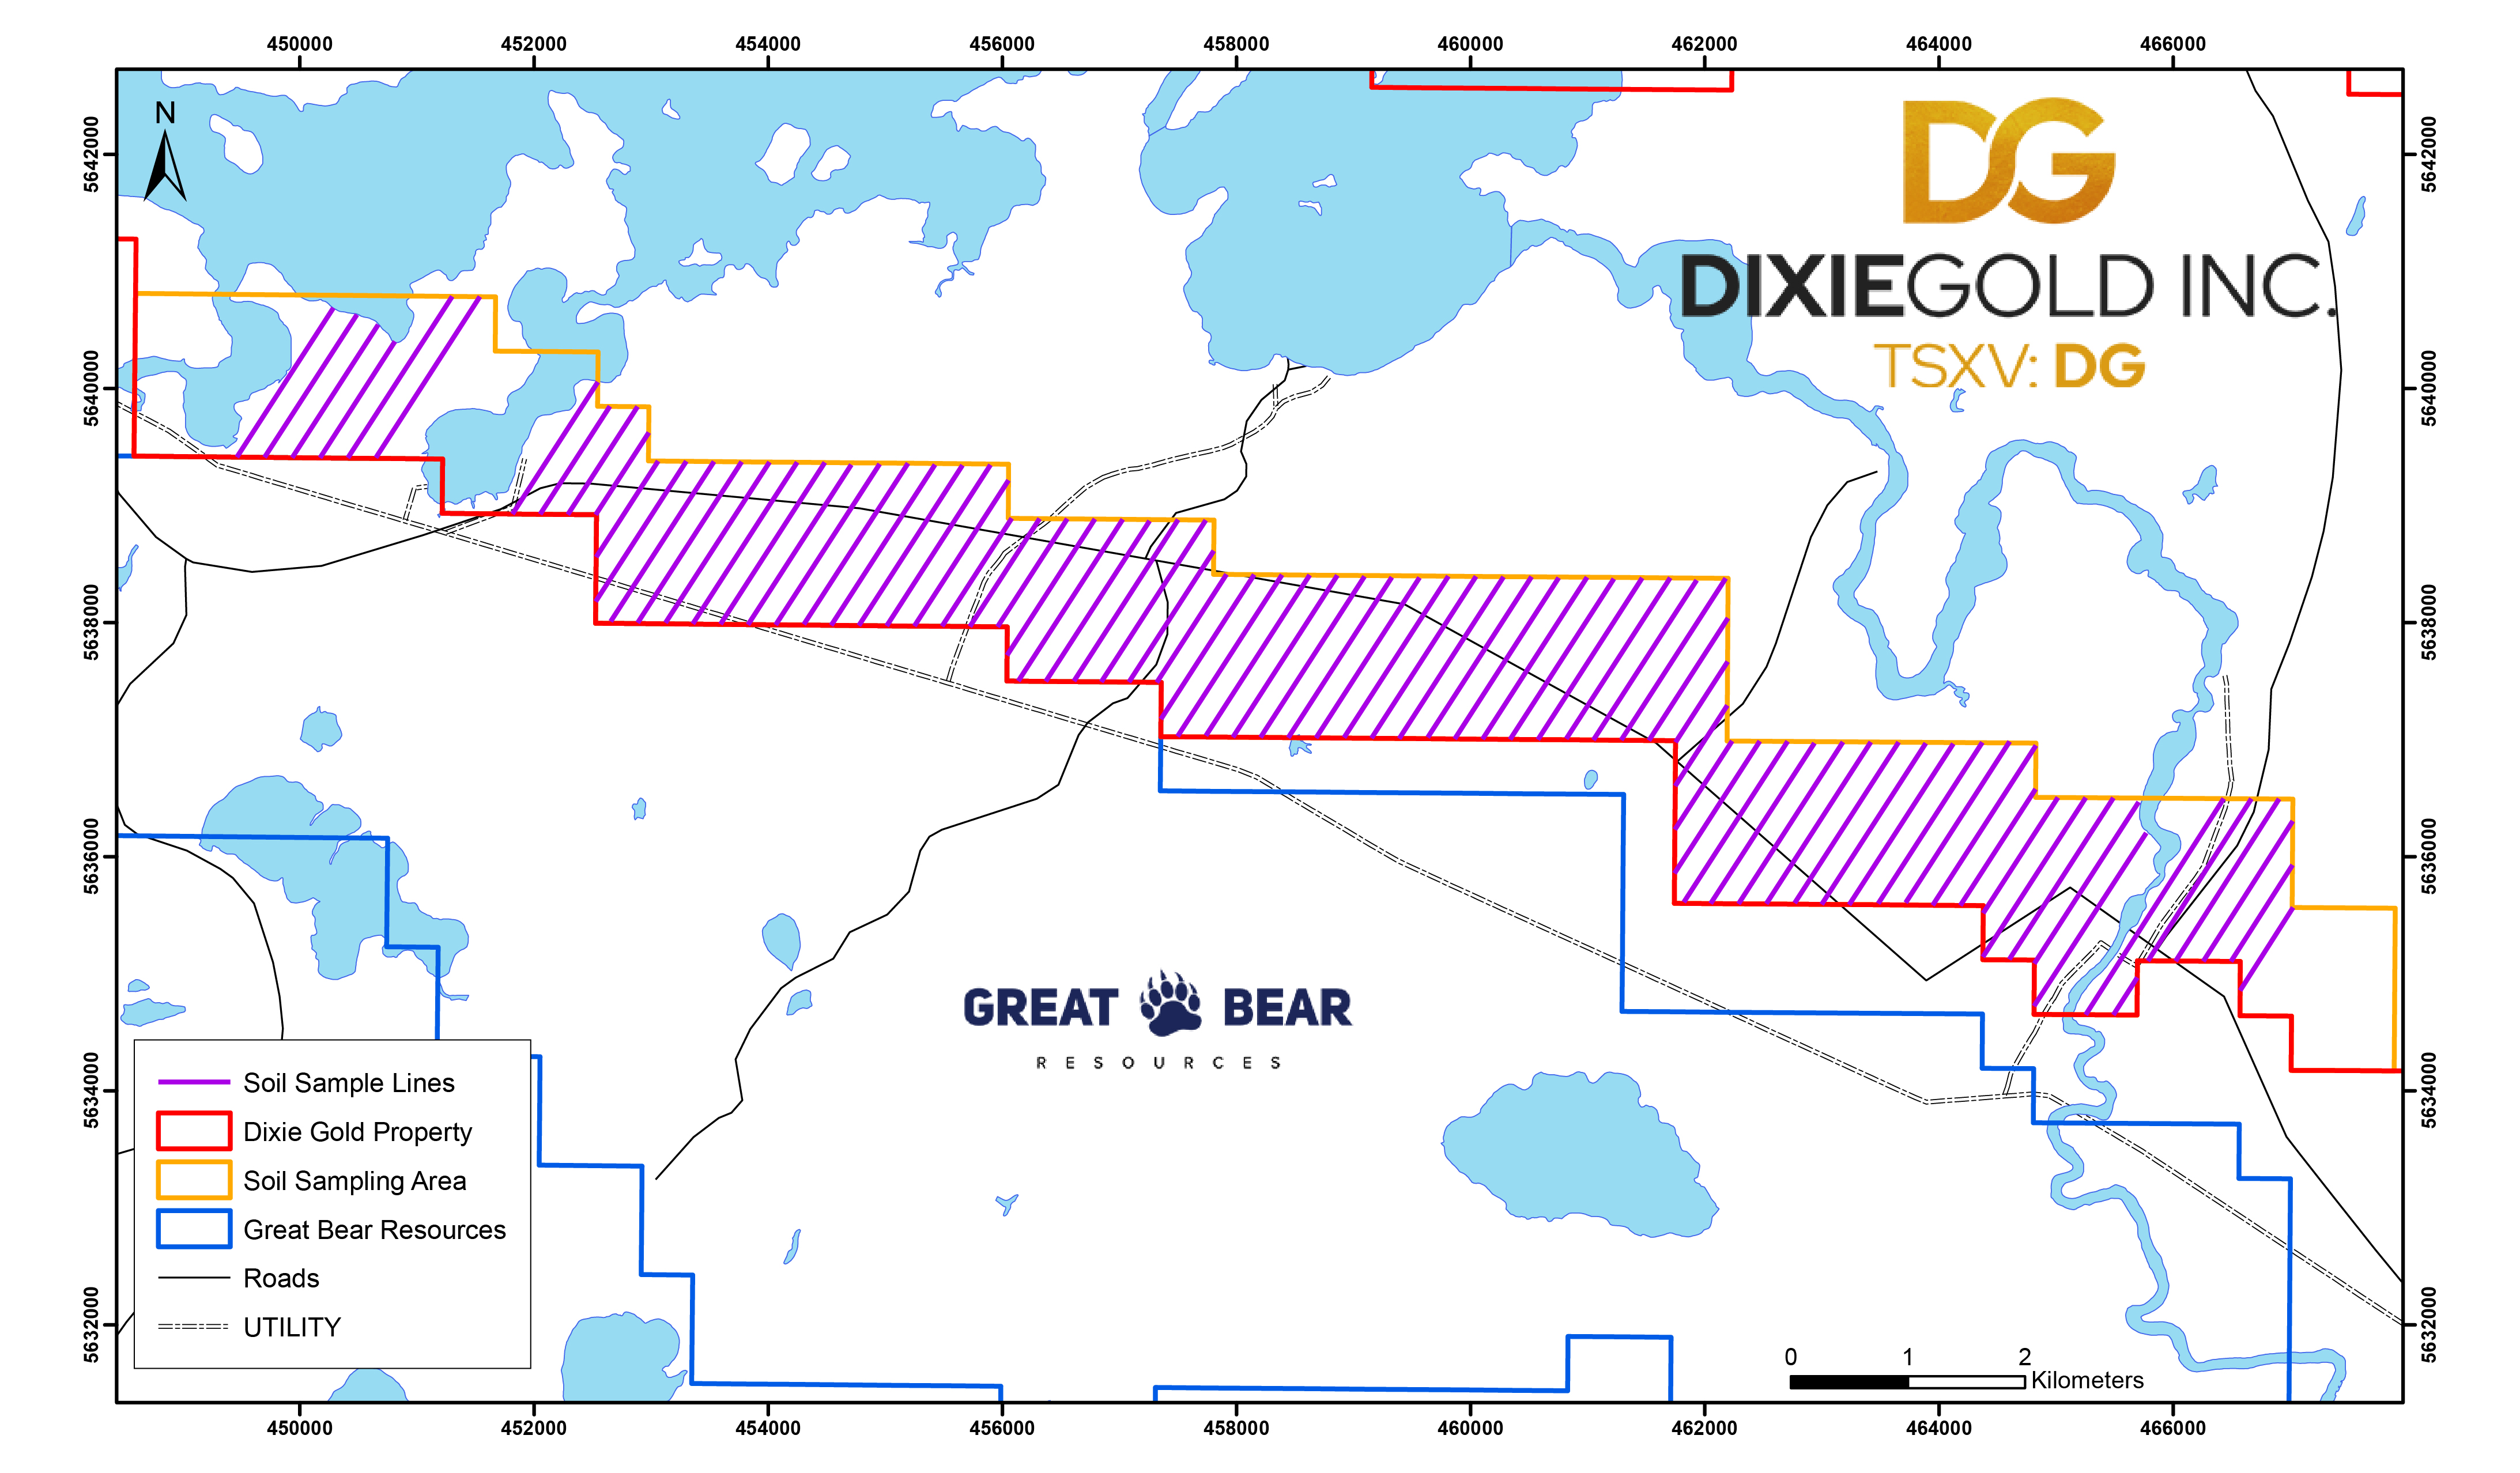 Dixie Gold Inc., Thursday, September 17, 2020, Press release picture